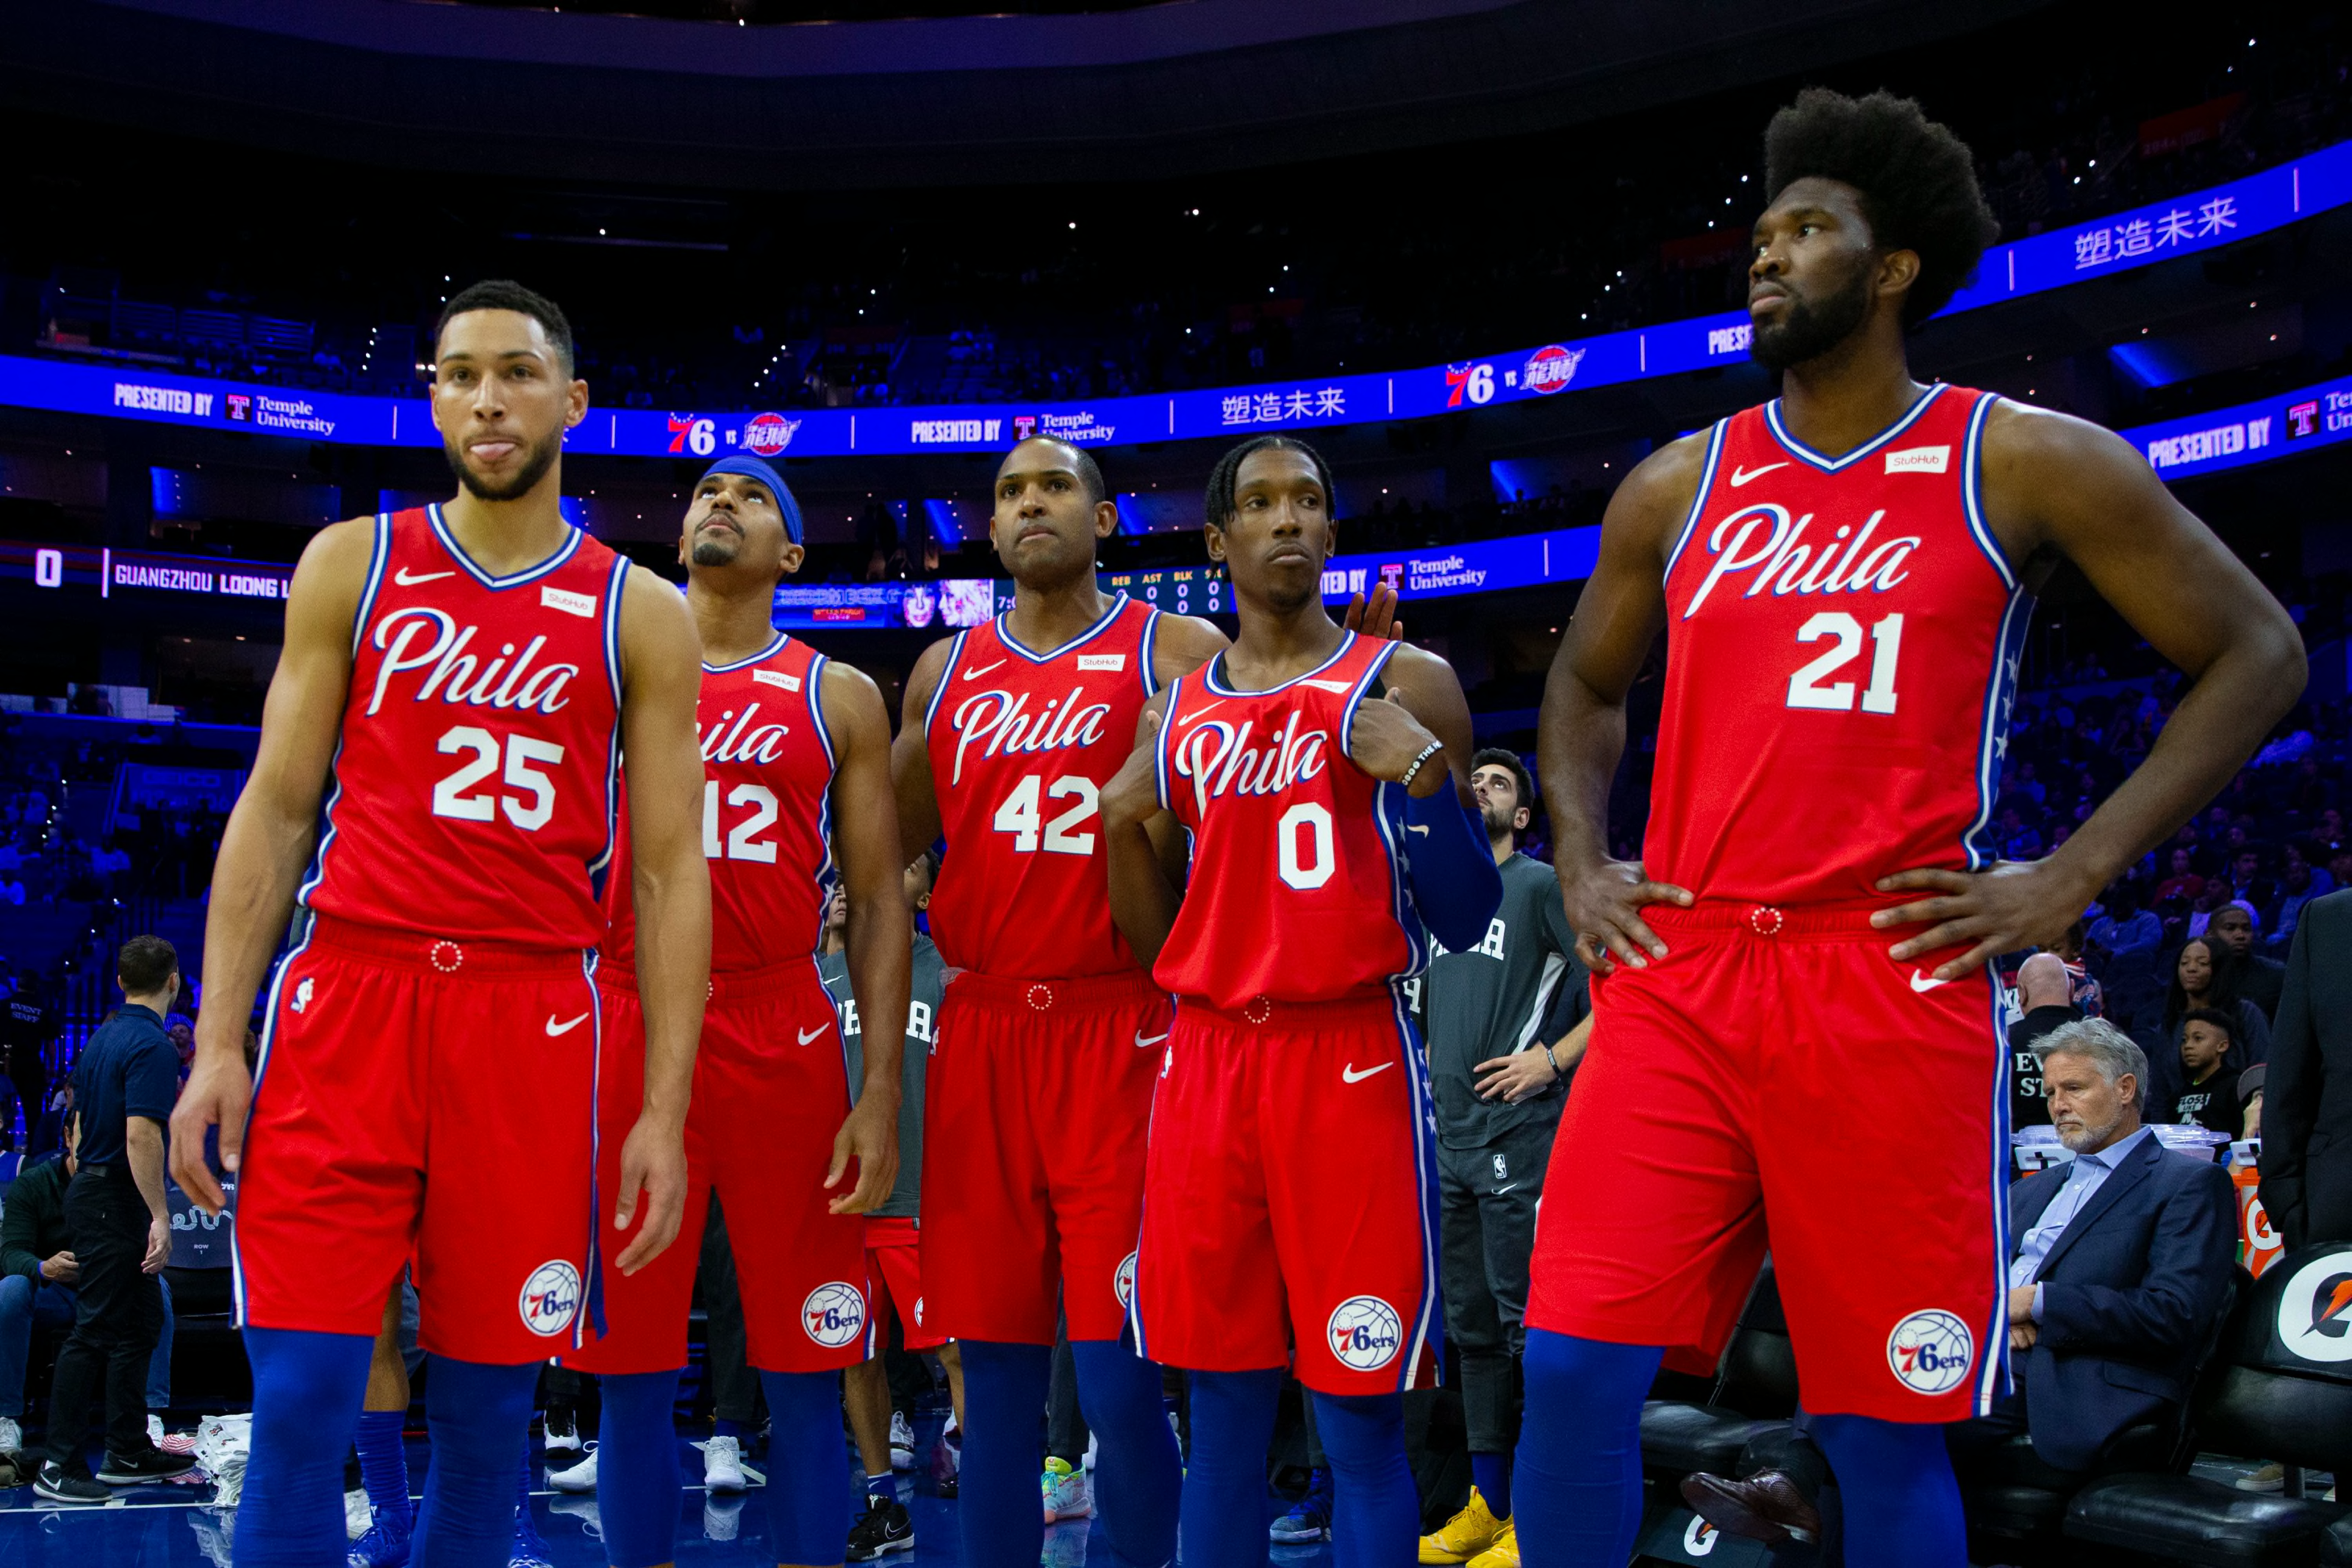 sixers roster 2022